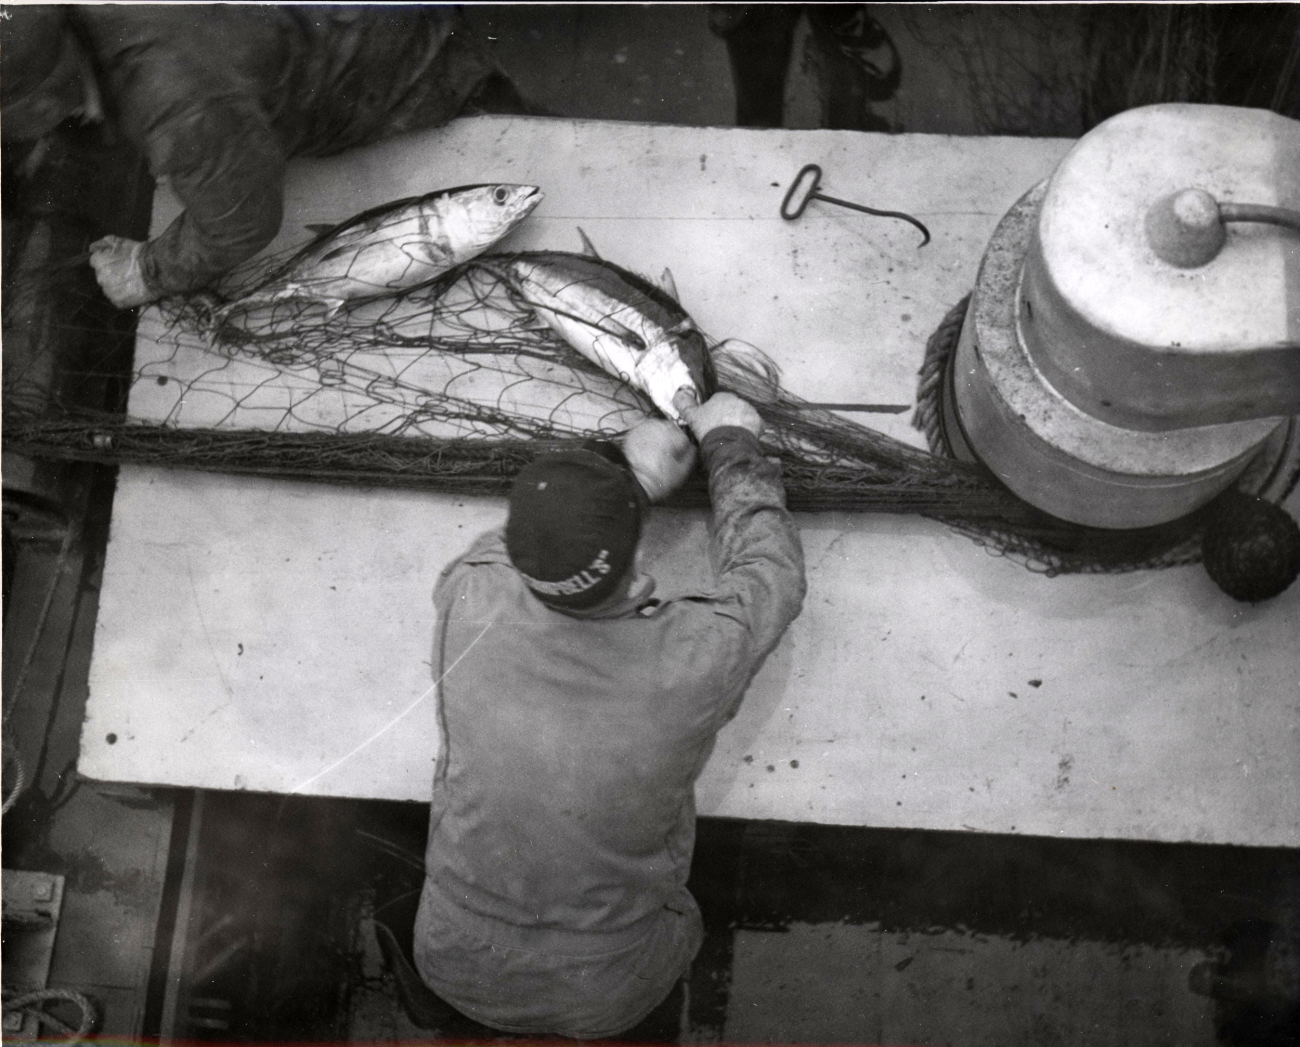 Removing albacore tuna from a gillnet